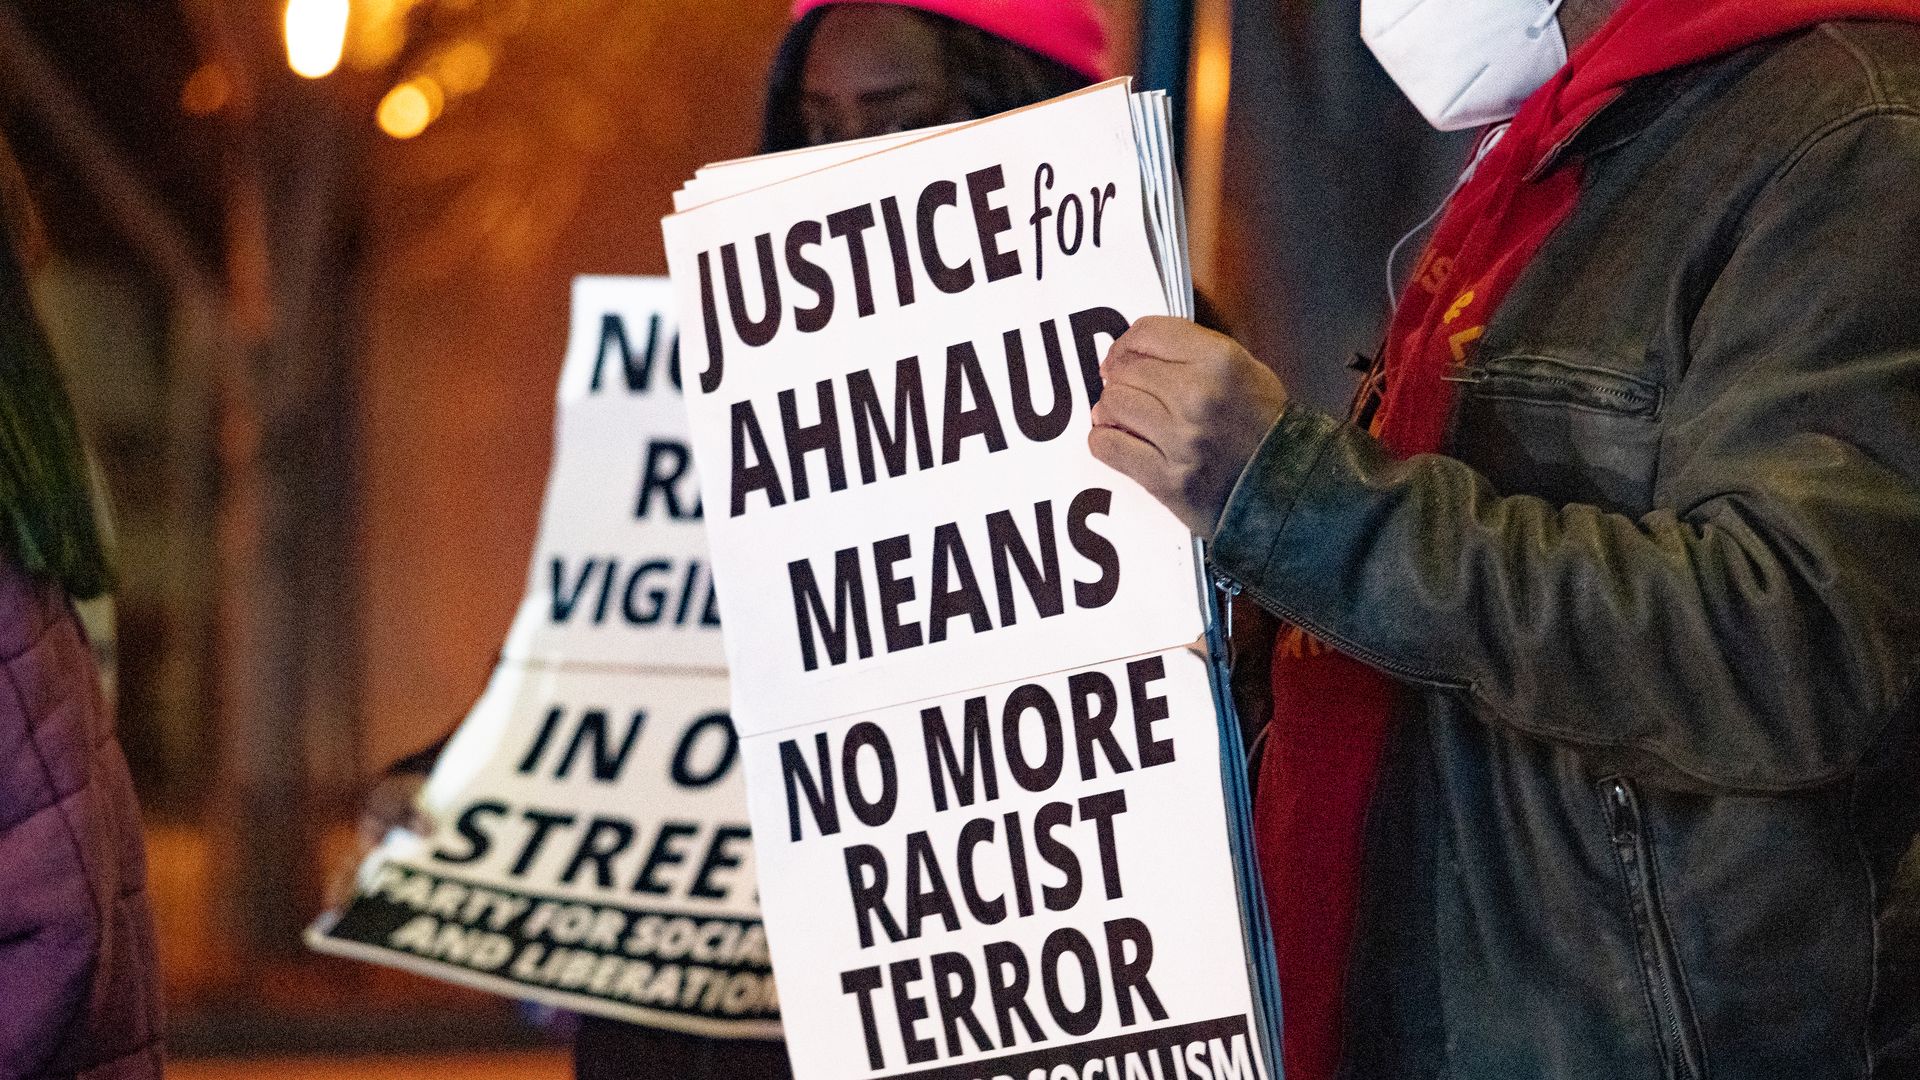 Photo of two people holding signs that say "Justice for Ahmaud Arbery means no more racist terror" at an outdoor vigil